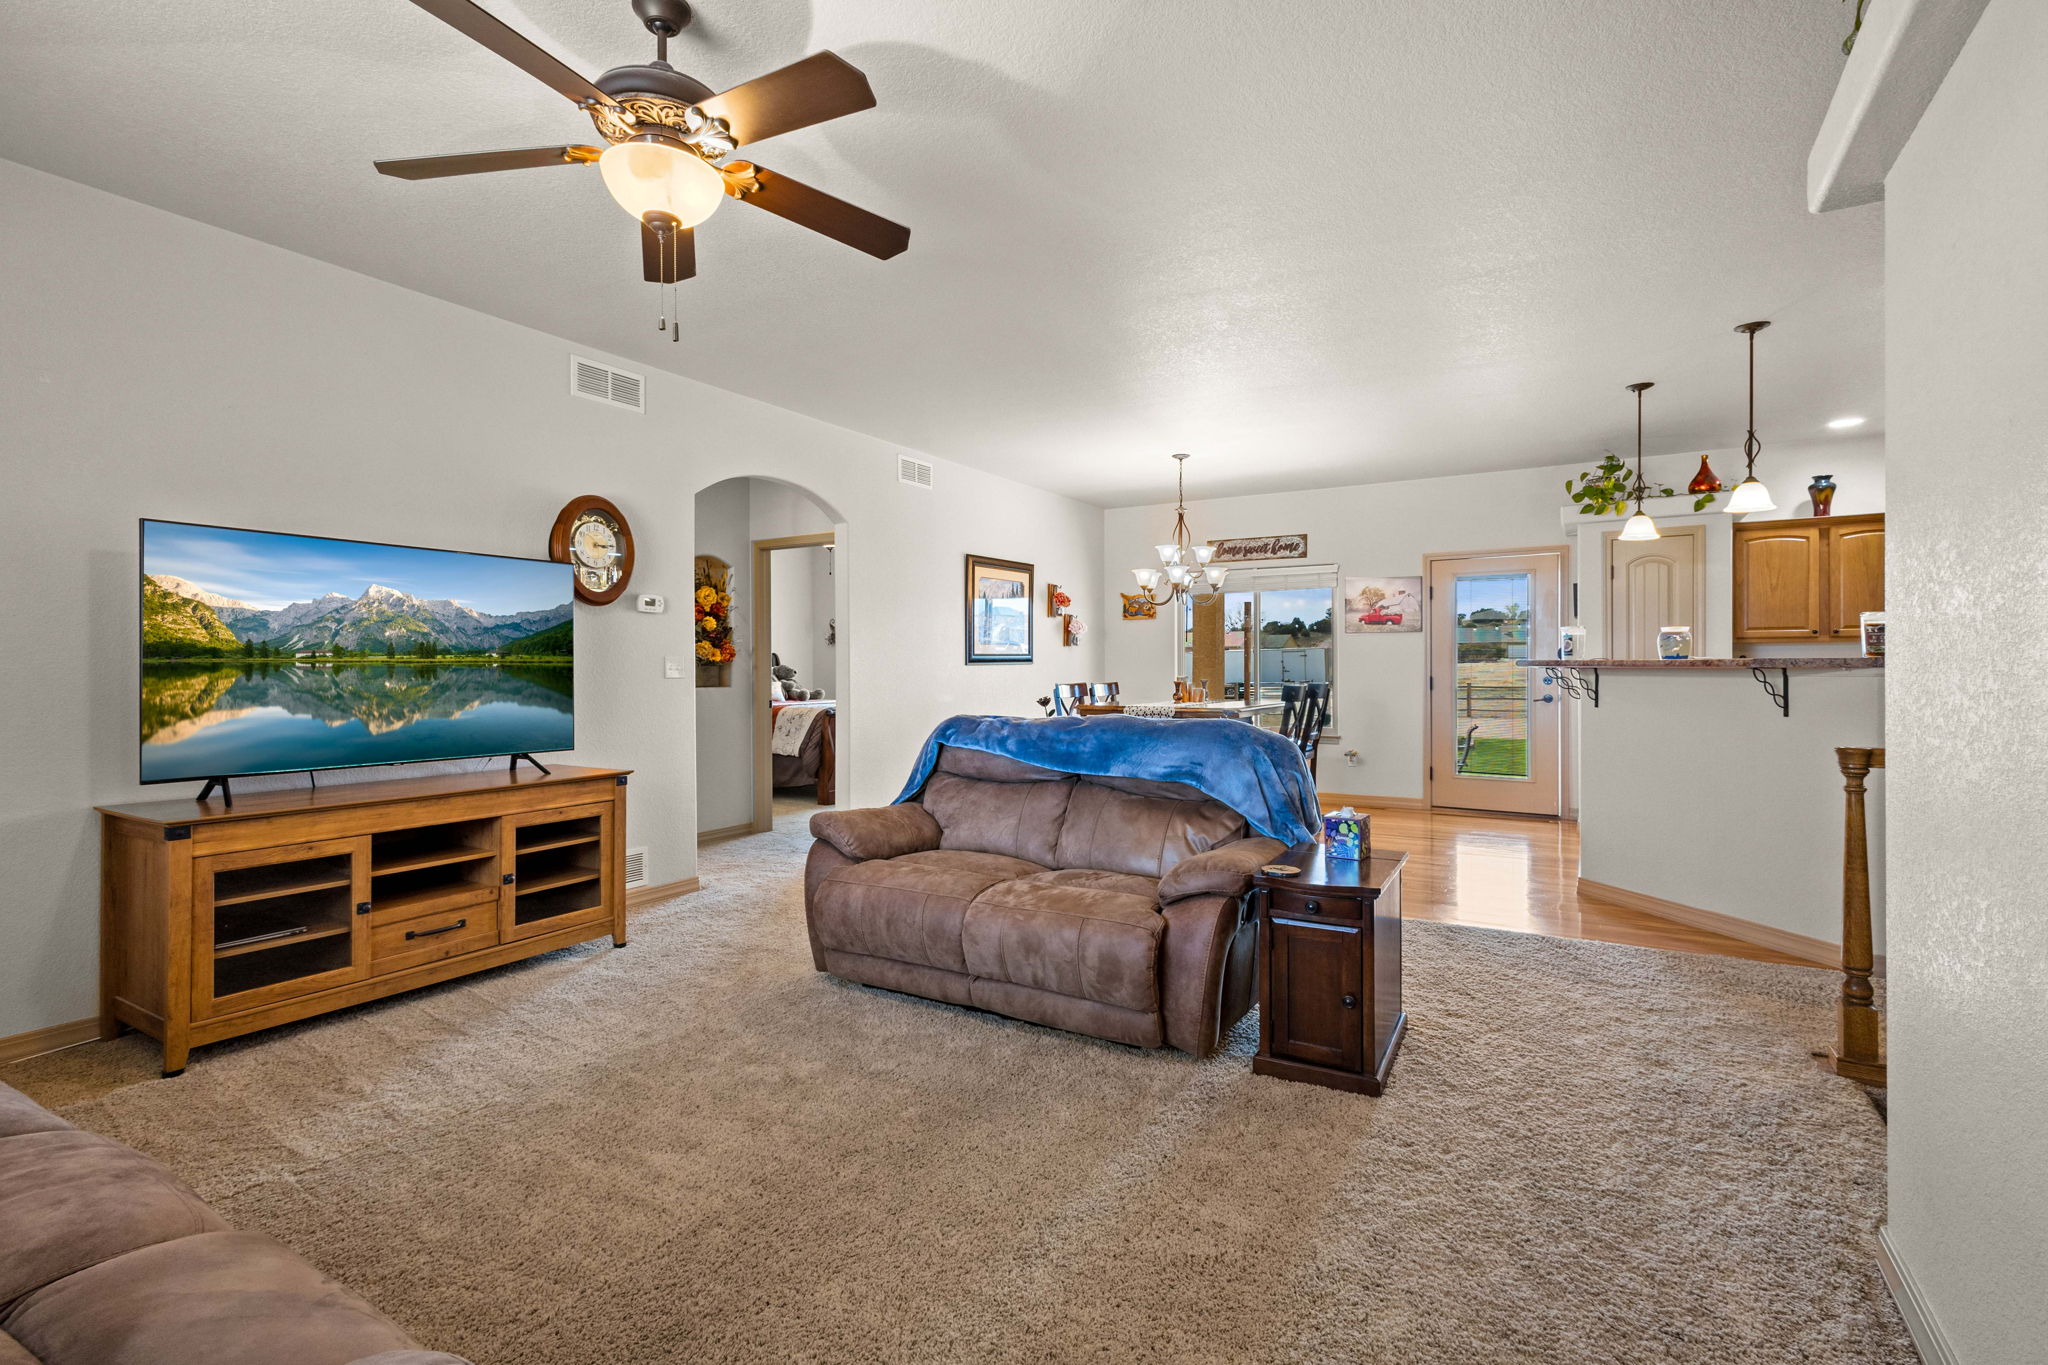 9' Ceilings greet guests and welcomes you home.